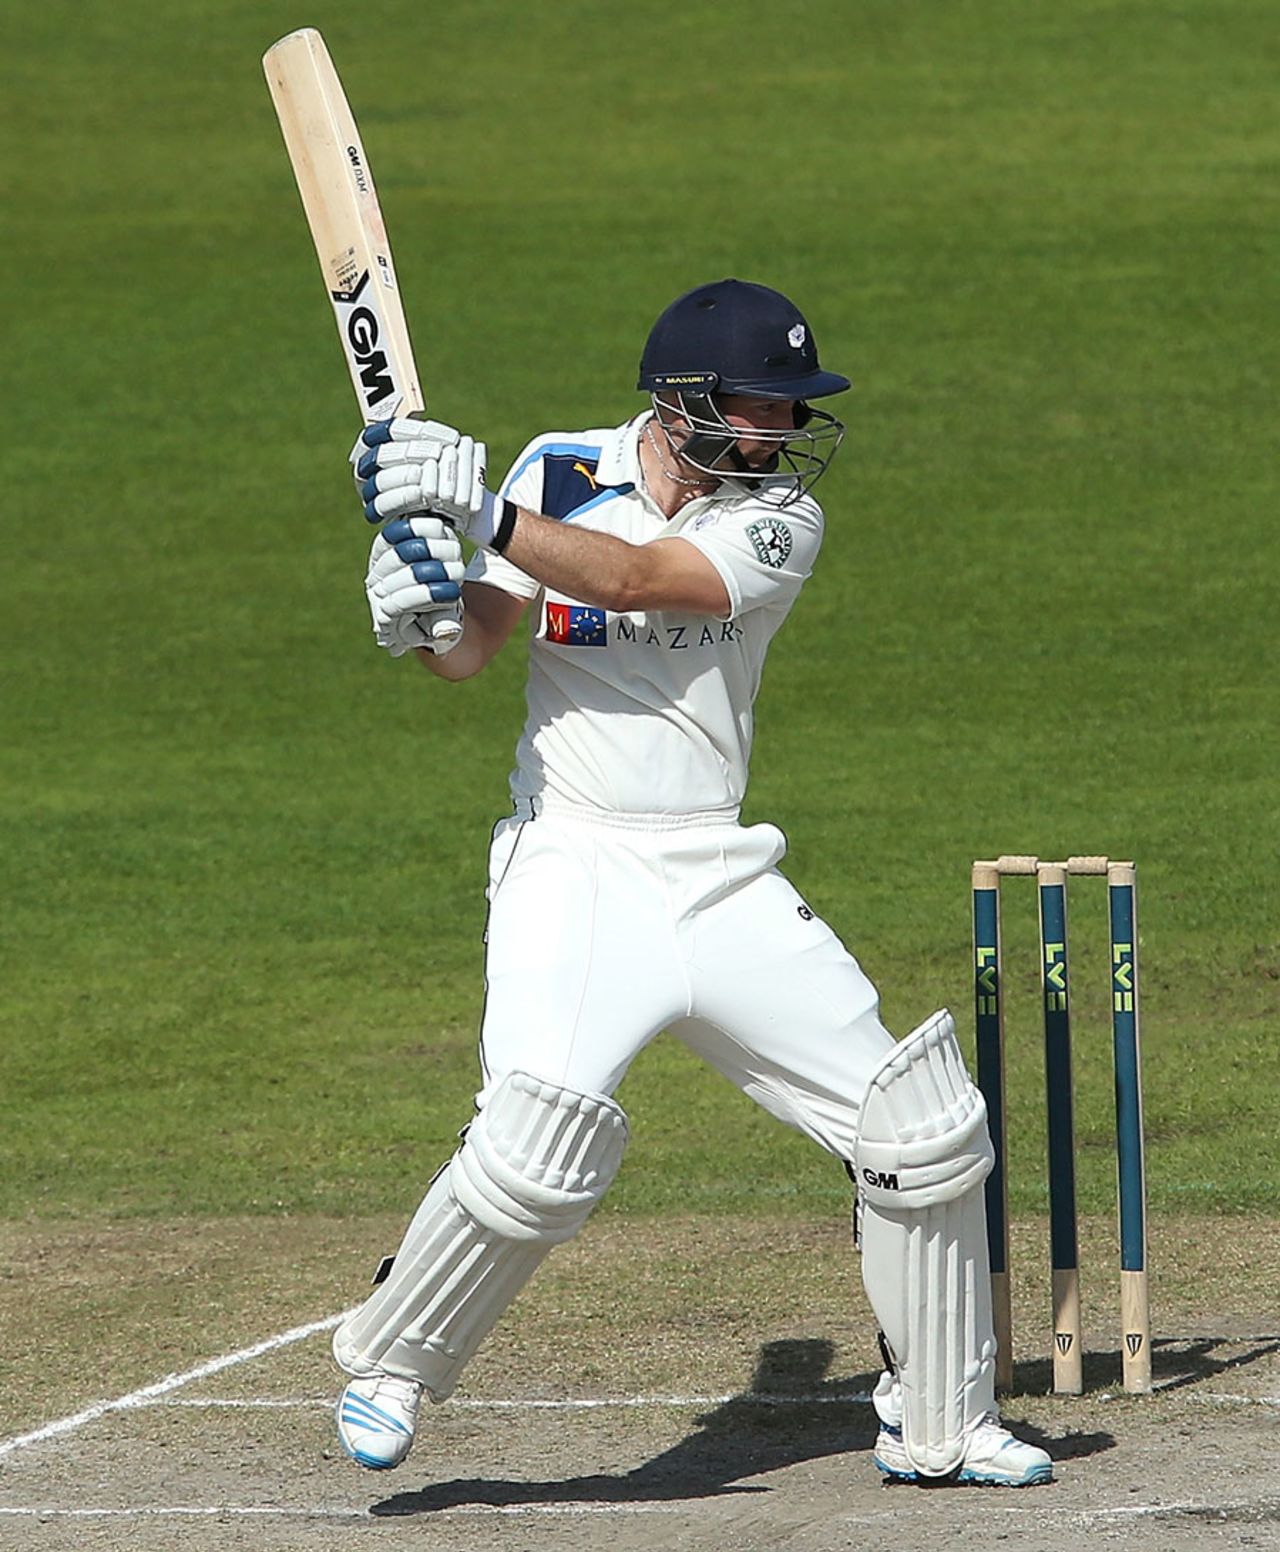 Adam Lyth cuts on his way to 251, Lancashire v Yorkshire, County Championship Division One, Old Trafford, 3rd day, September 2, 2014